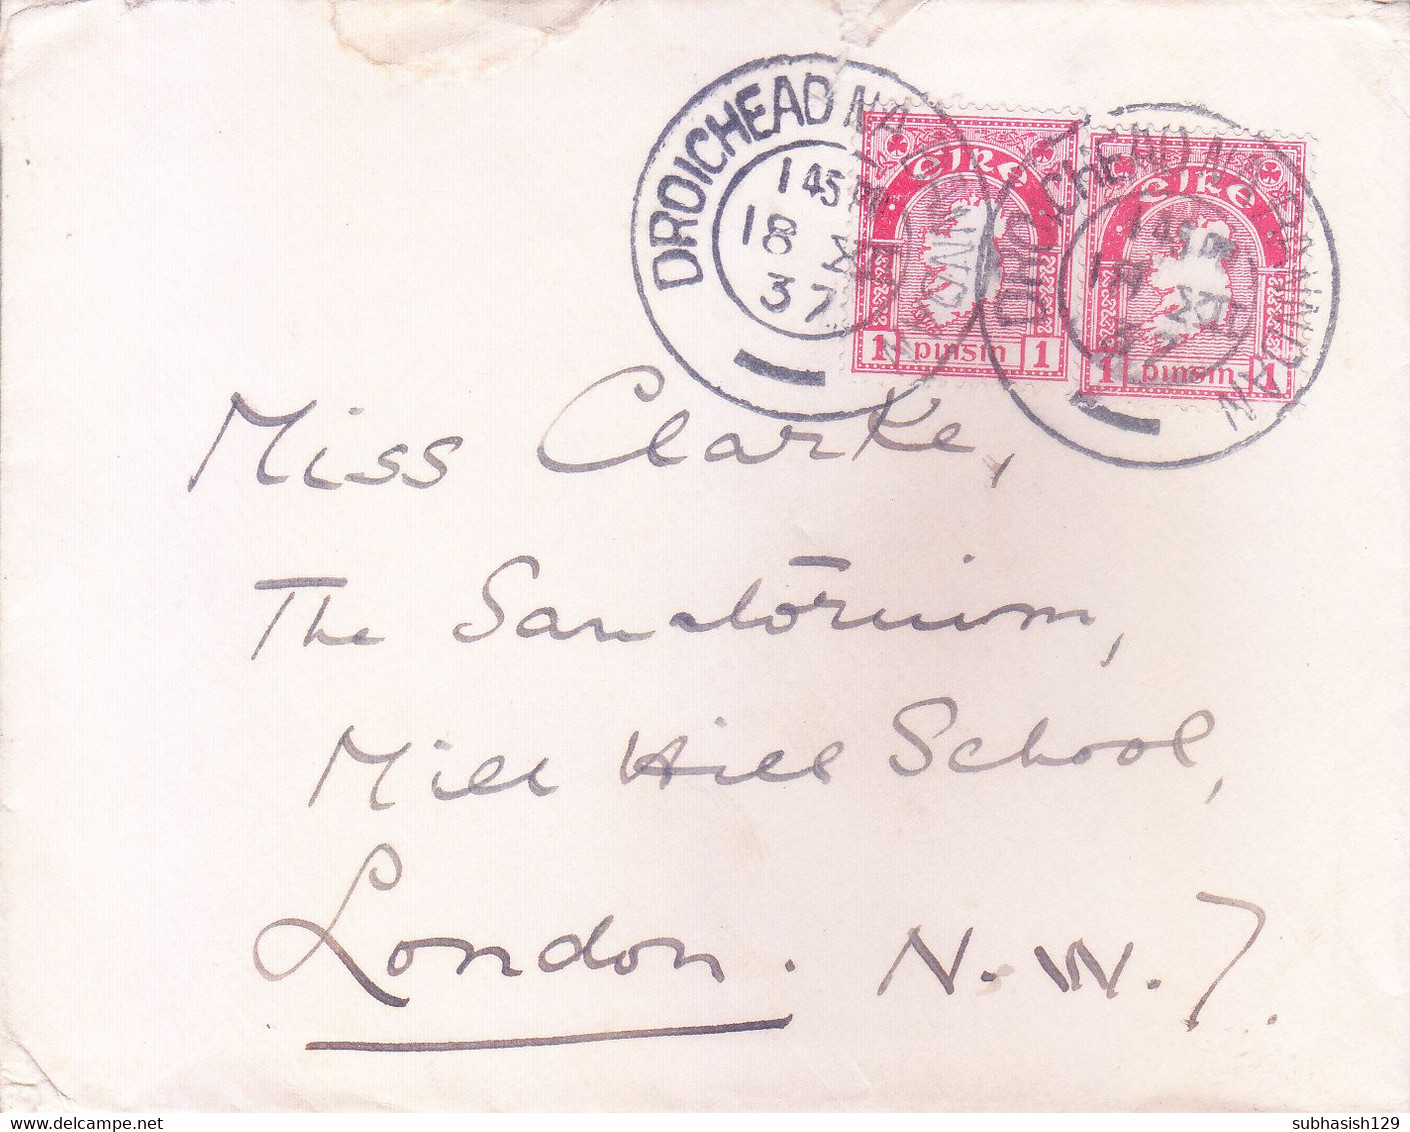 IRELAND : ENTIRE : YEAR 1937 : COVER POSTED FROM DROICHEAD NA RANNDAN FOR LONDON : USE OF 2v 1 PINSIN STAMPS - Cartas & Documentos